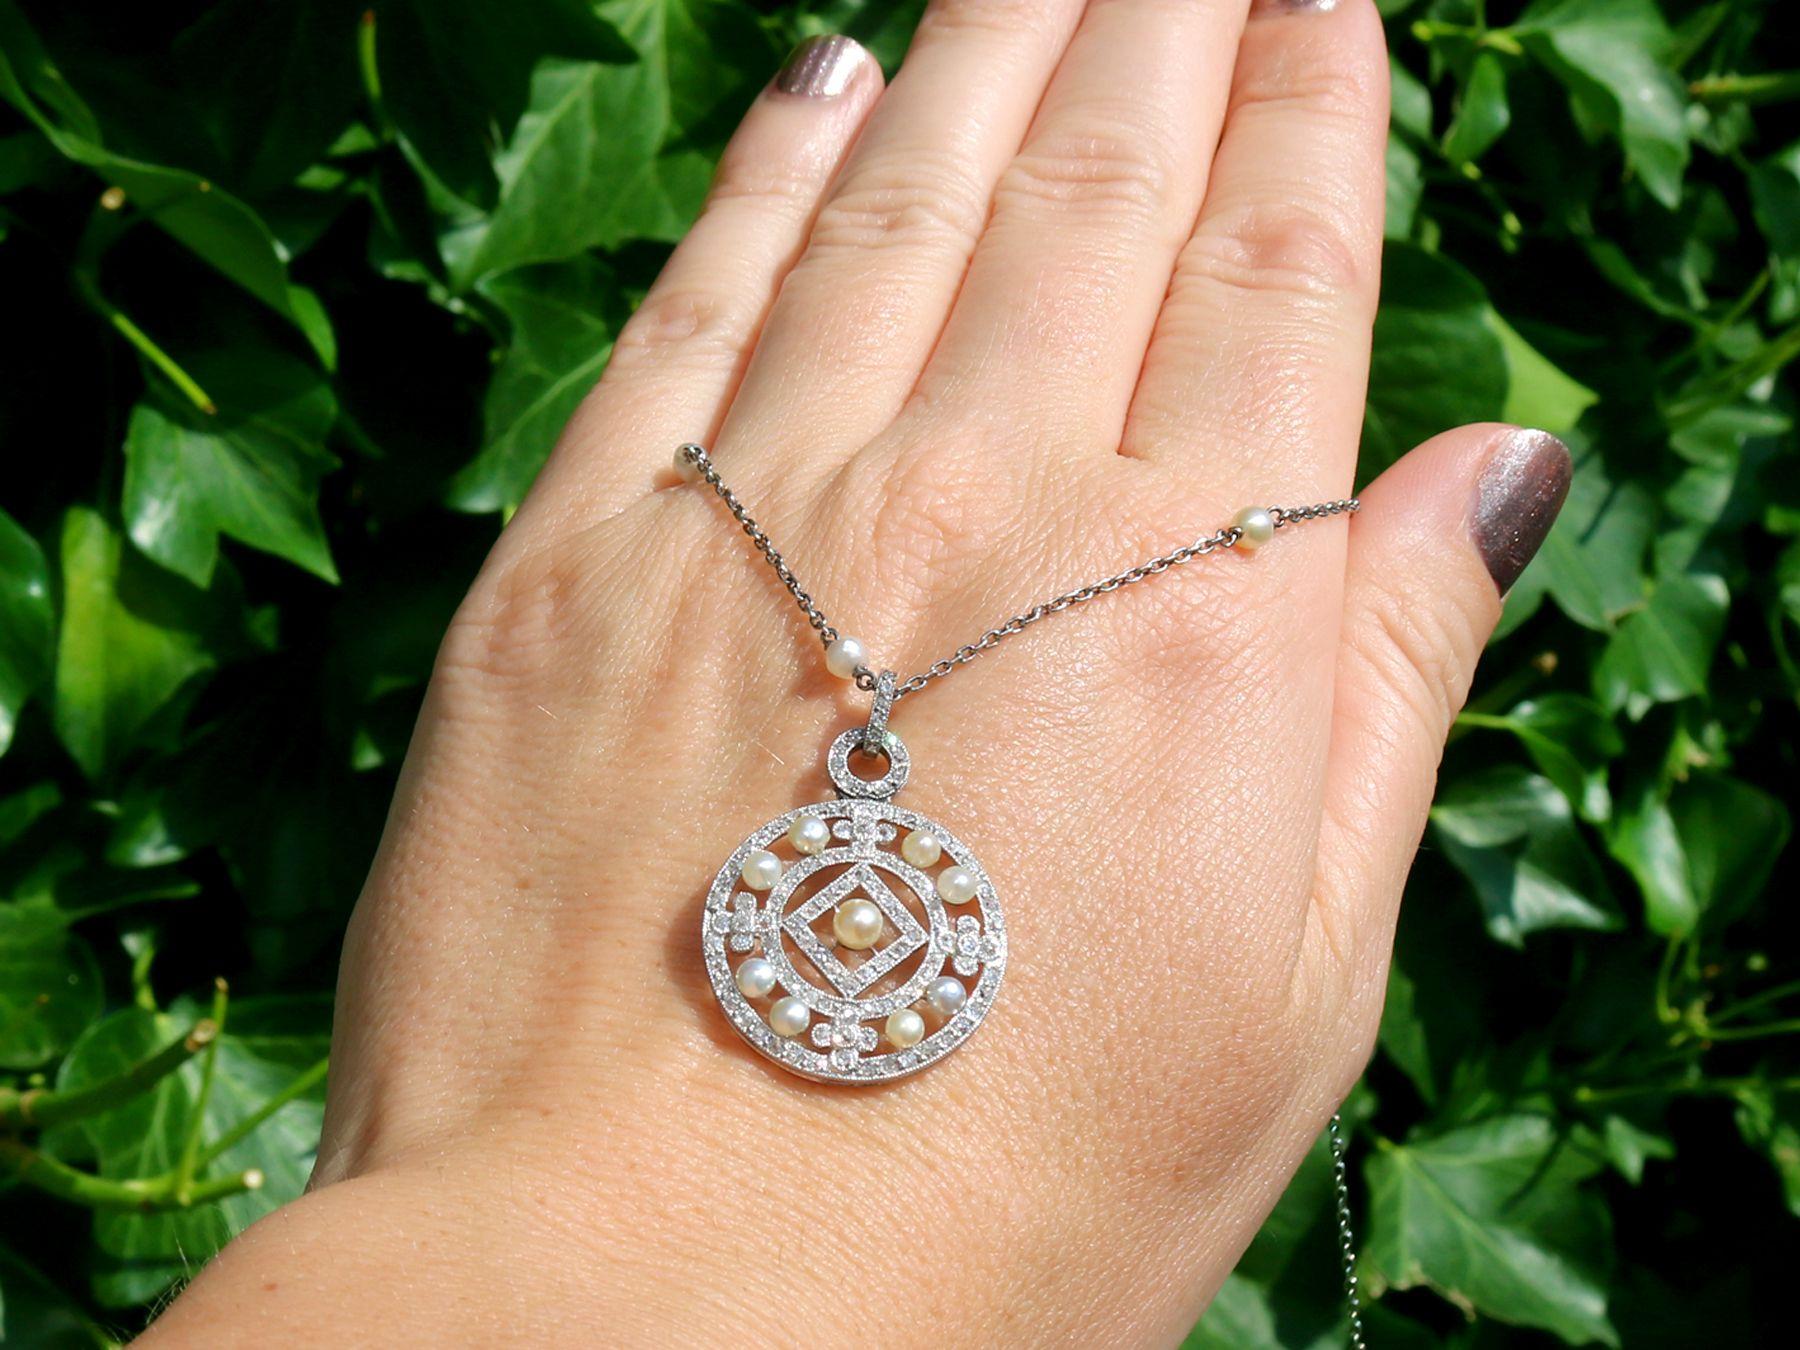 A stunning antique seed pearl, 1.11 carat diamond and platinum pendant on a vintage pearl and 14 karat white gold chain; part of our diverse antique jewelry collections.

This stunning, fine and impressive antique diamond and pearl pendant has been